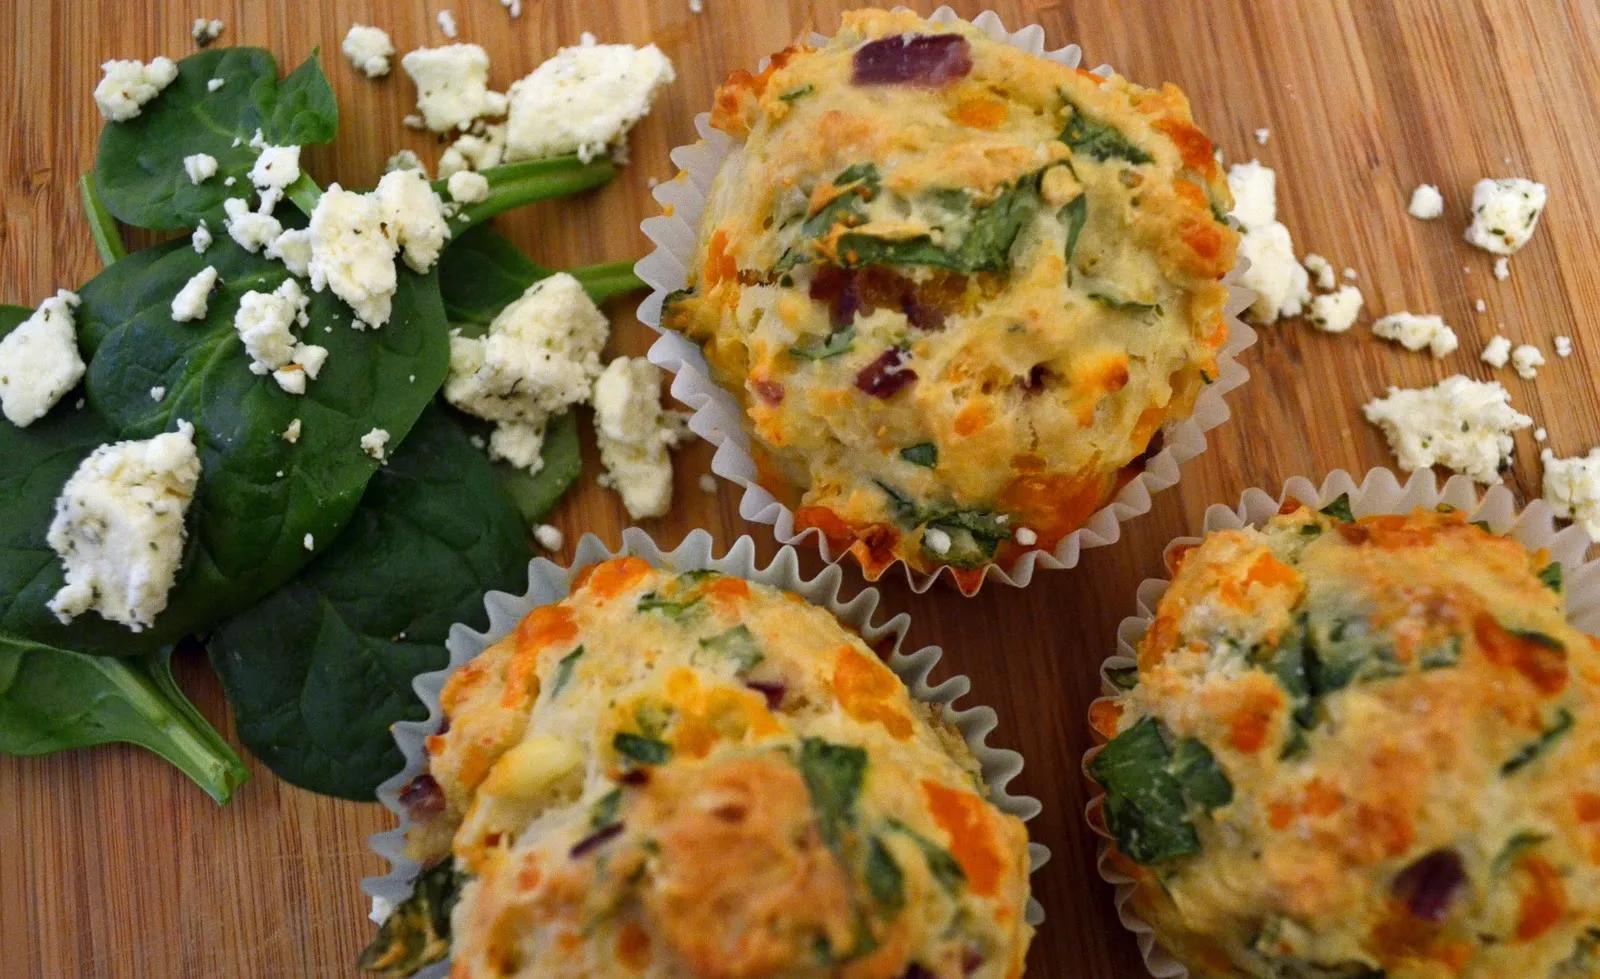 We Took the Road Less Traveled: Mediterranean Muffins